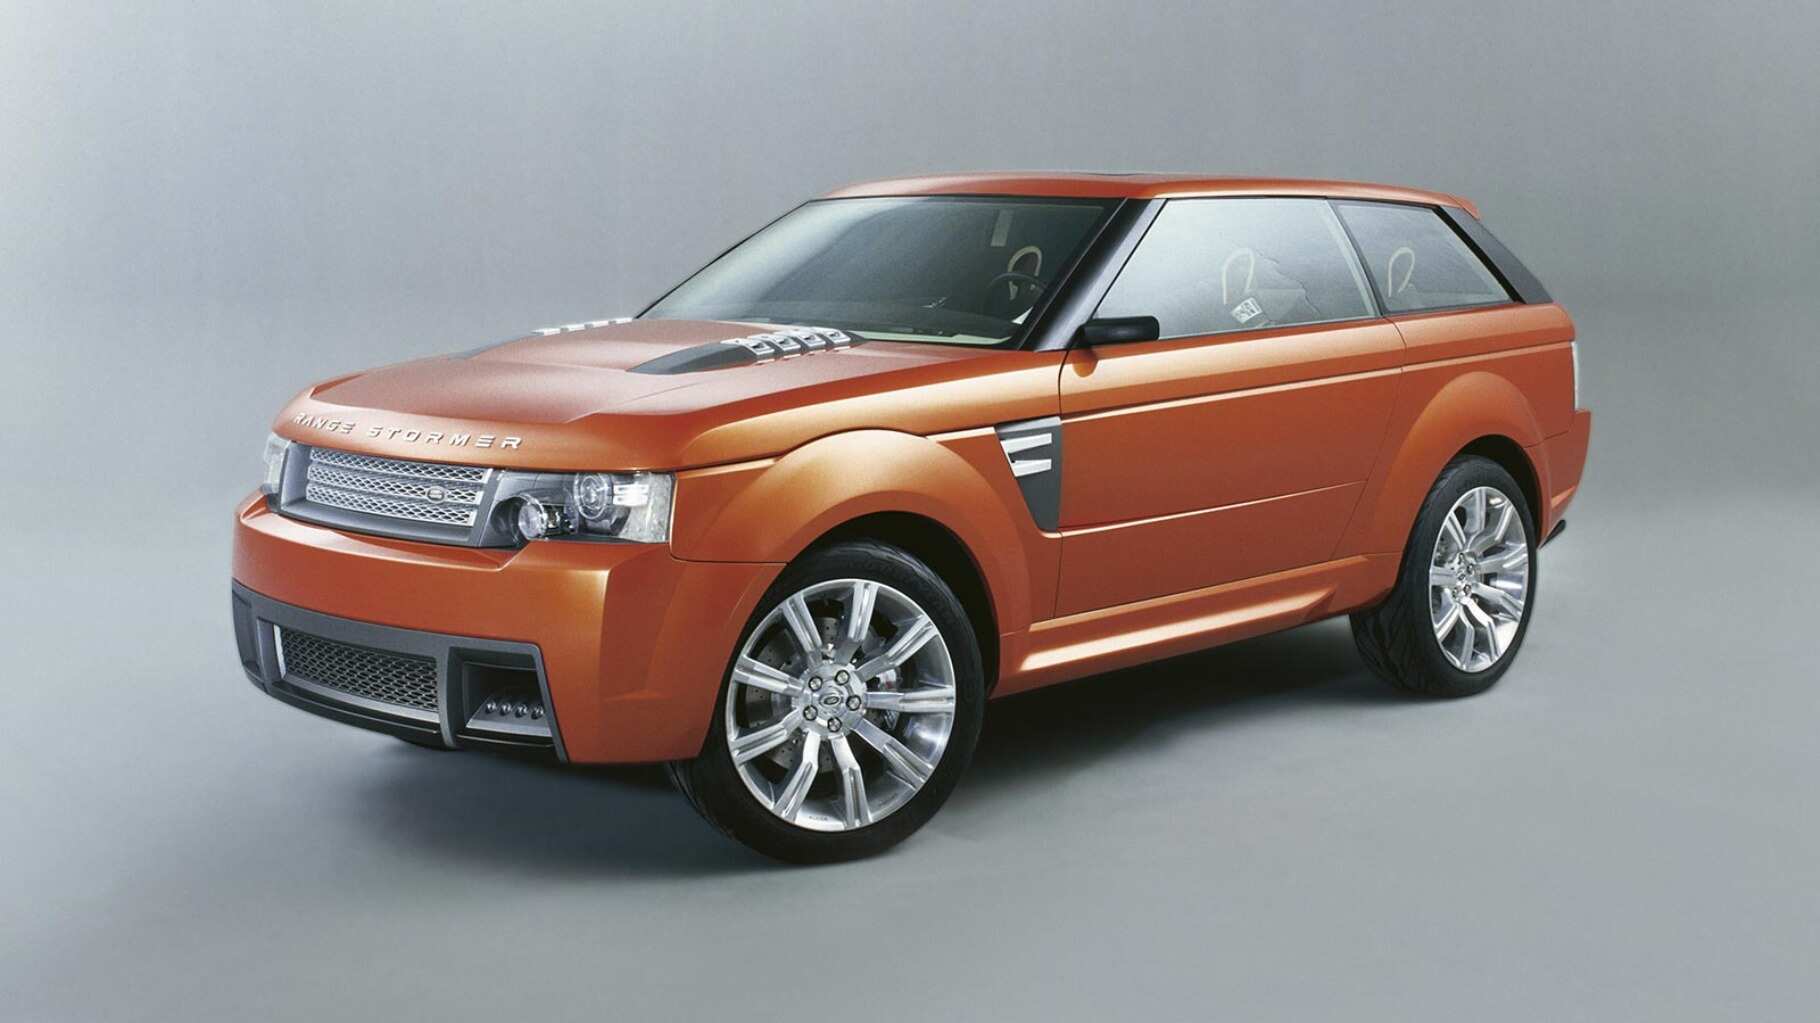 Image Gallery History of Range Rover Land Rover USA